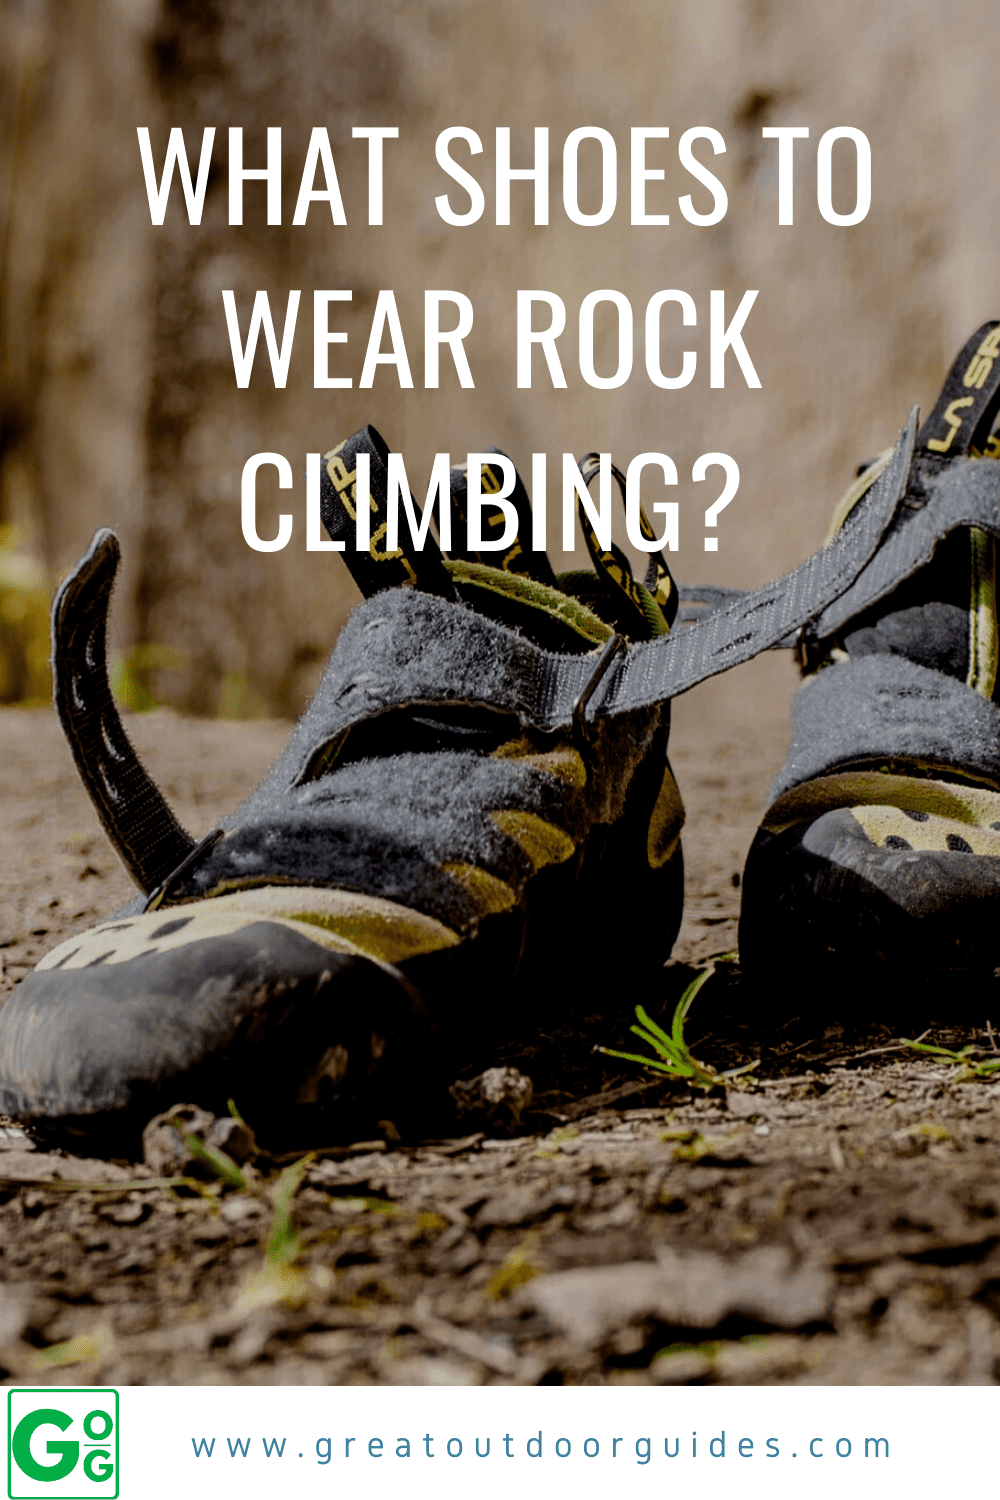 What Shoes To Wear Rock Climbing - Great Outdoor Guides